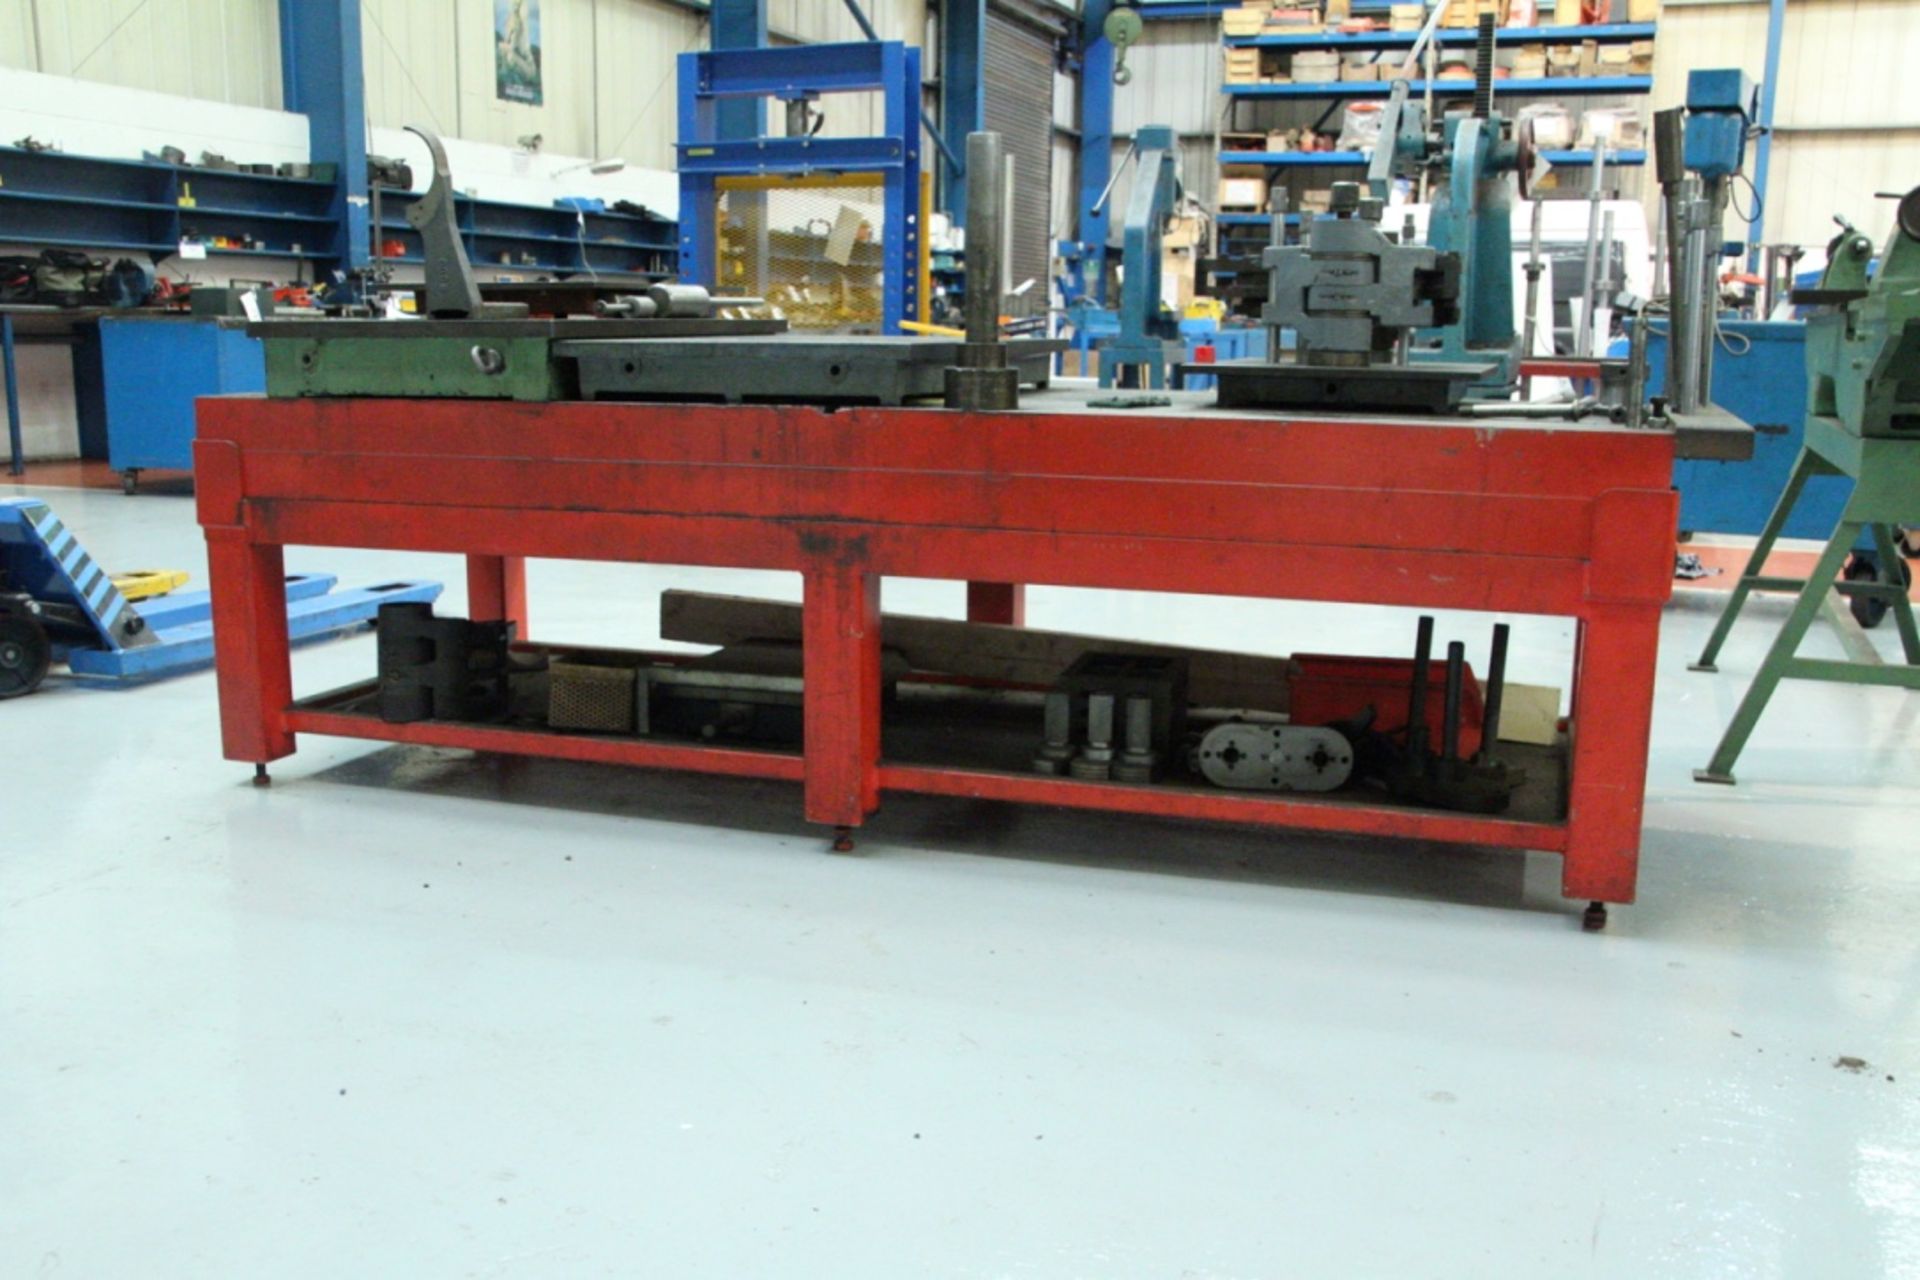 T-SLOTTED TABLE, approx. 2.43m x 915mm, with steel stand (excluding contents) - Image 2 of 3